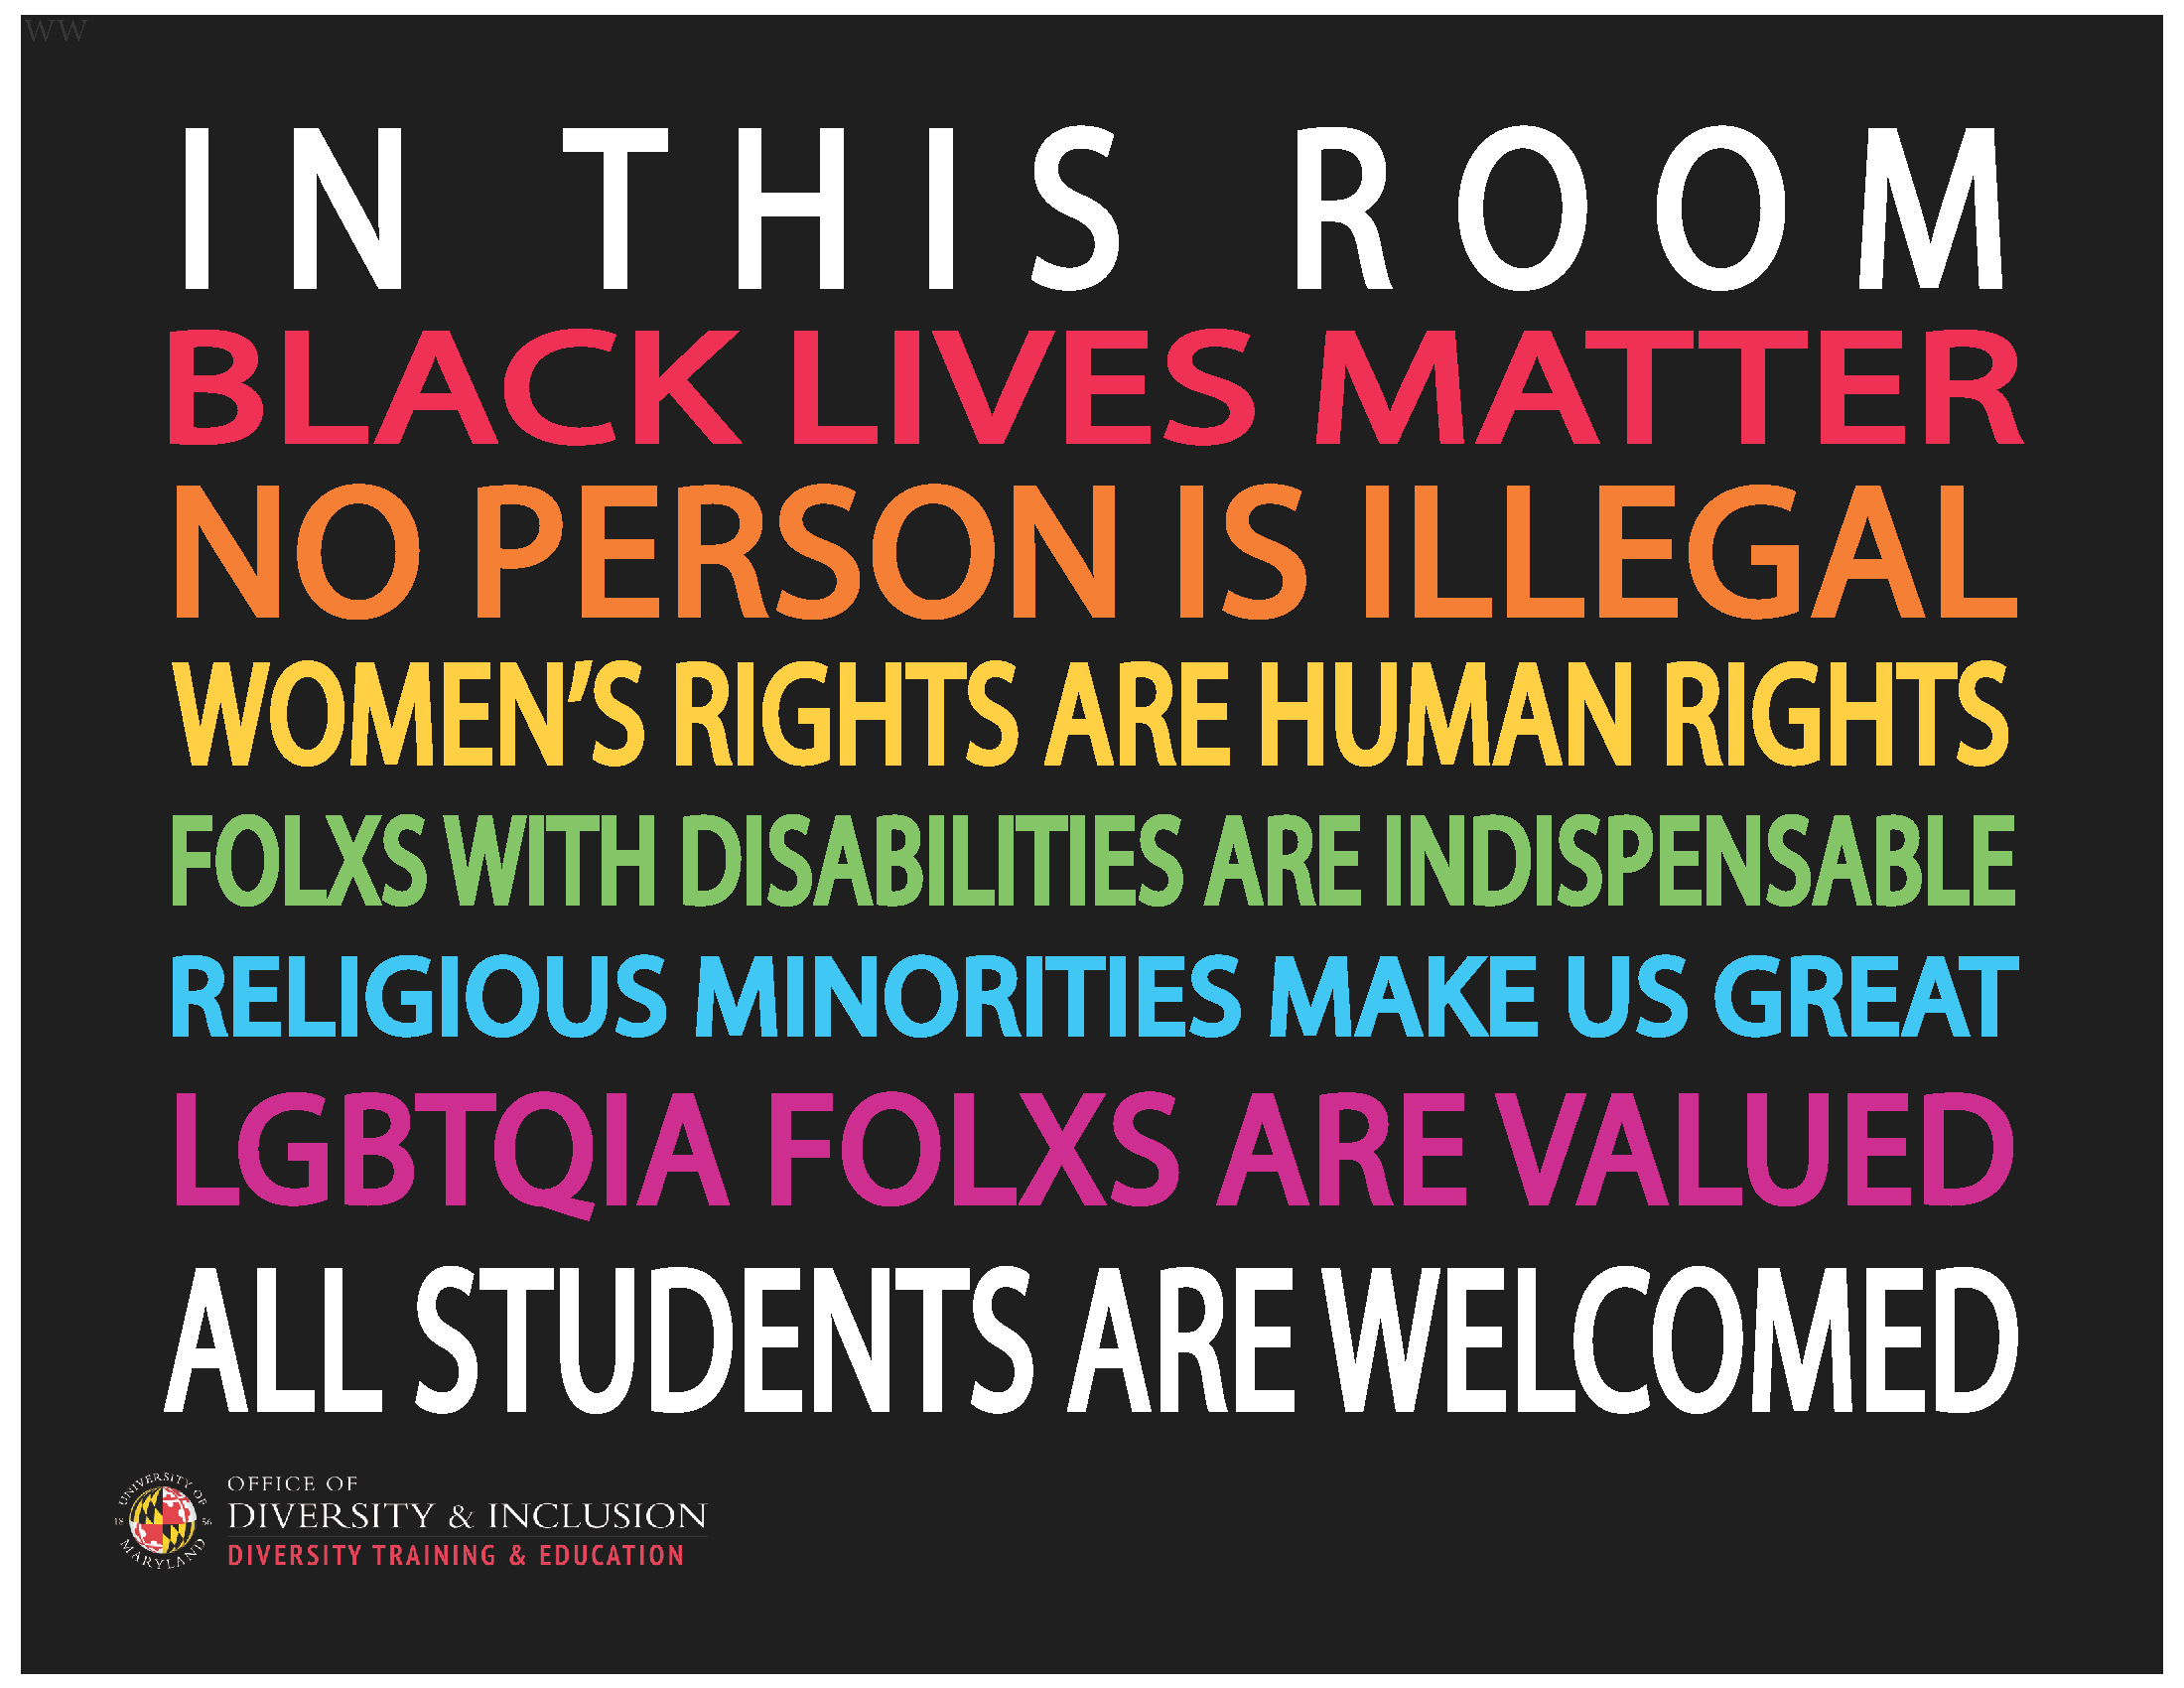 Poster of text. Text reads: In This Room: Black lives matter, no person is illegal, women's rights are human rights, folxs with disabilities are indispensable, religious minorities make us great, LGBTQIA folxs are valued, all students are welcomed.